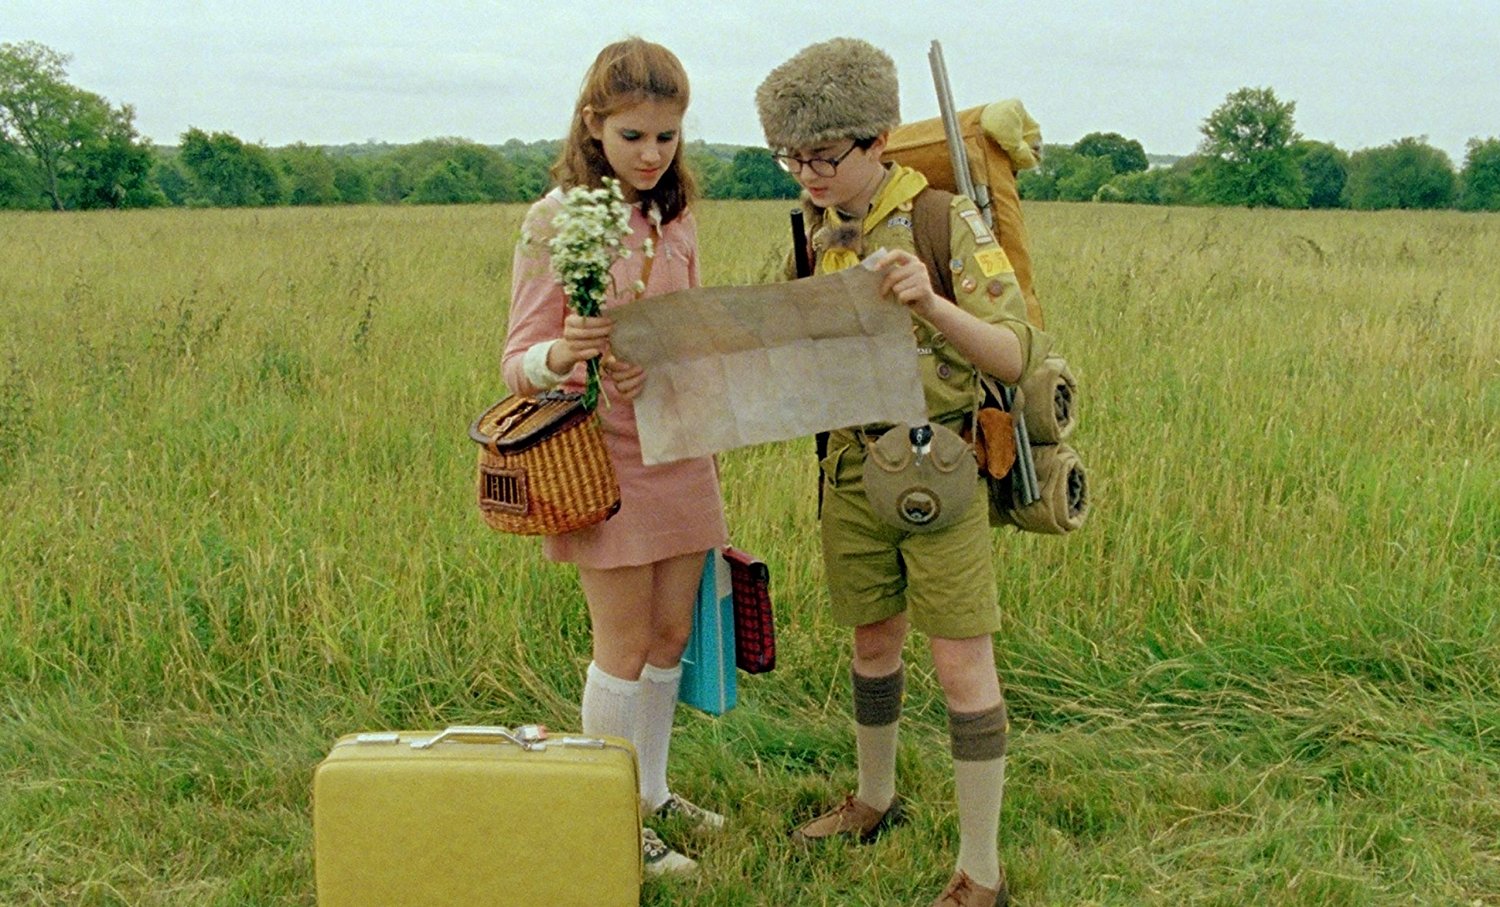 New collection of travel bags inspired by Wes Anderson